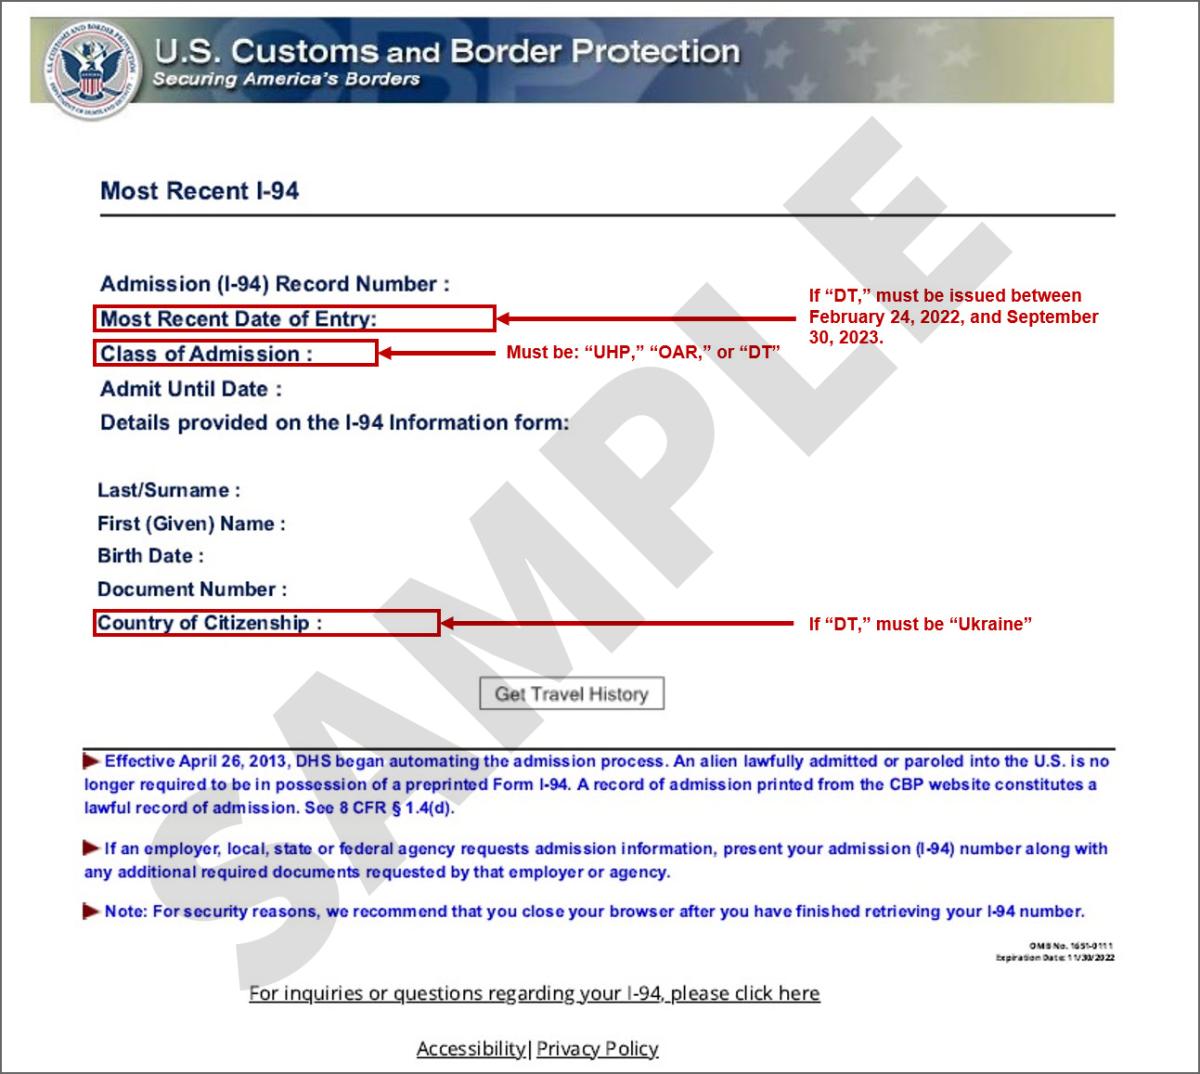 Sample of Form I-94 with instructions on completing certain form fields.